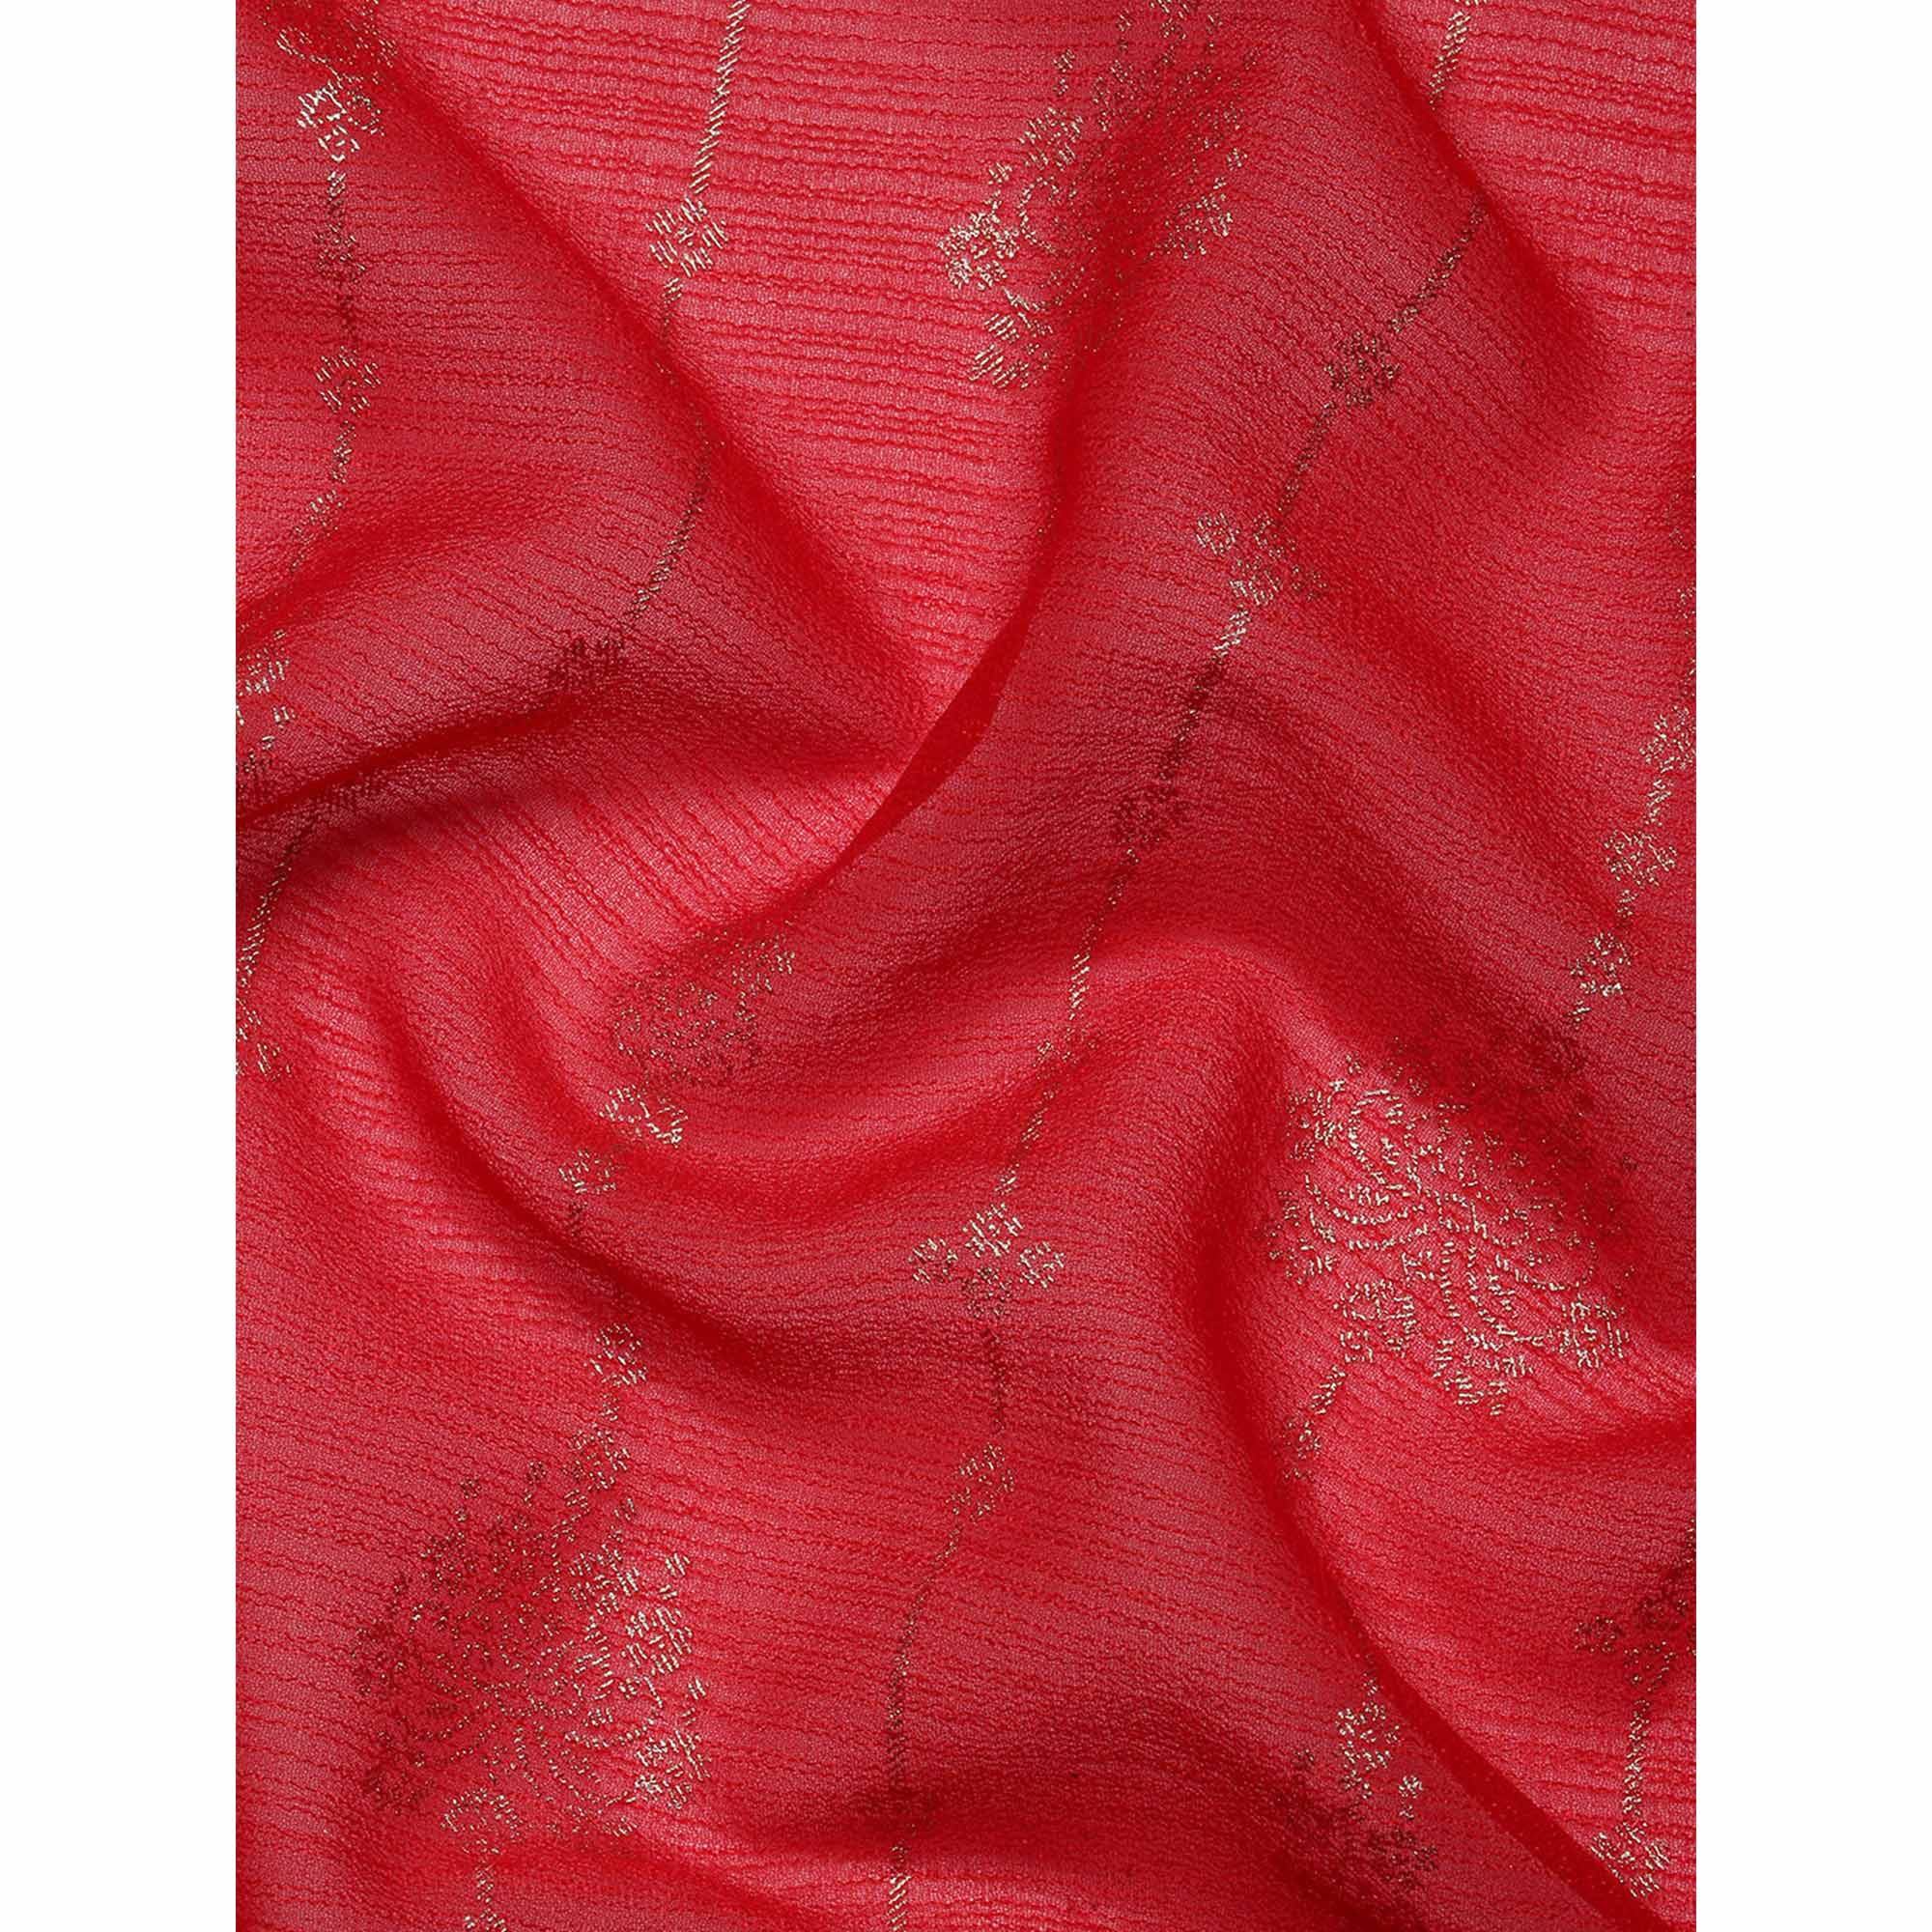 Red Foil Printed With Fancy Border Zomato Silk Saree